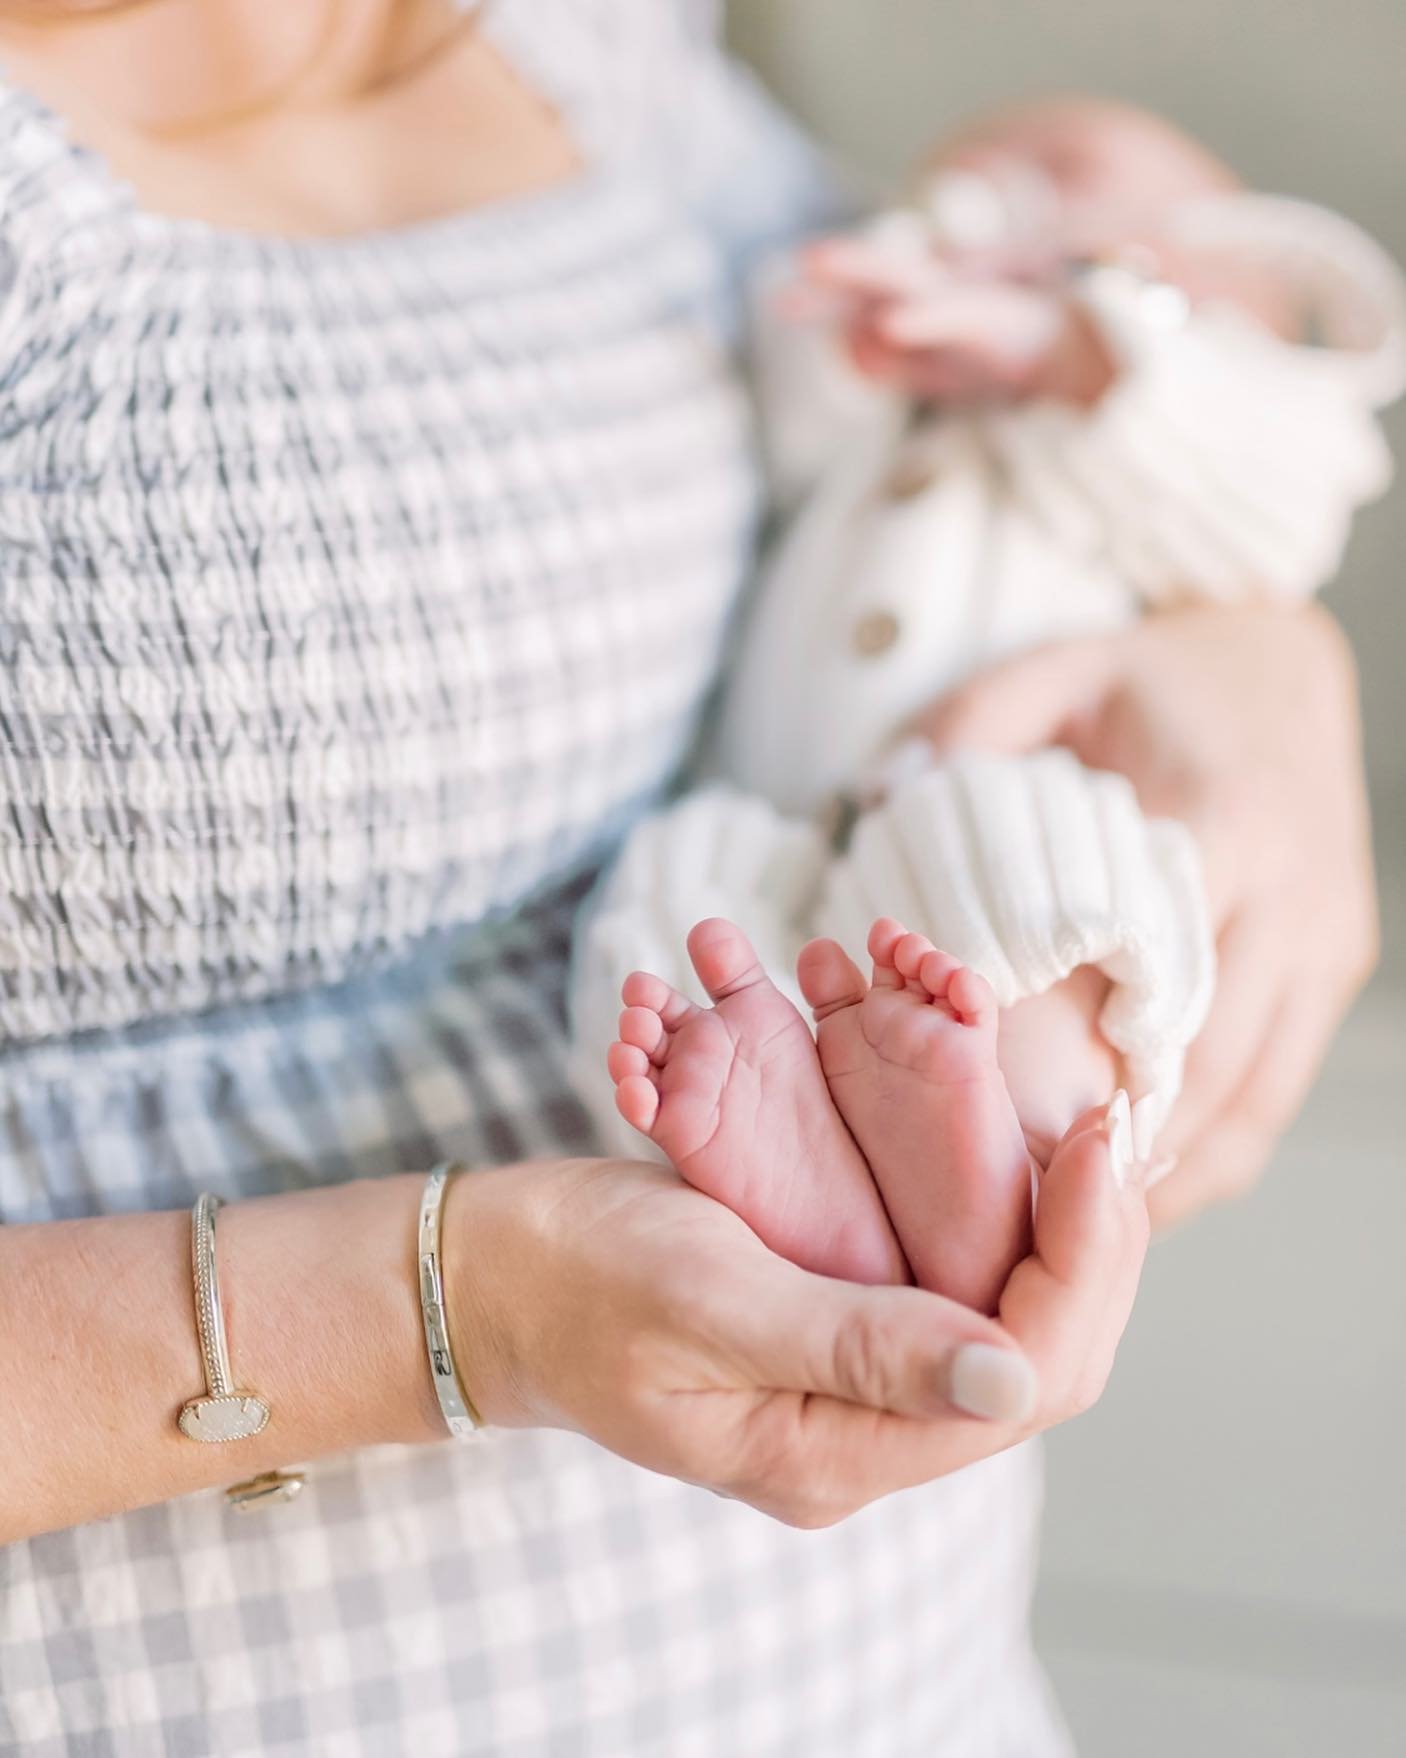 Welcoming the tiniest miracles with open arms and a camera lens! There&rsquo;s nothing quite like capturing those precious details &mdash; from the smallest toes to the sweetest little smiles.
.
.
.
.
.
#dallasnewbornphotographer #dfwnewbornphotograp